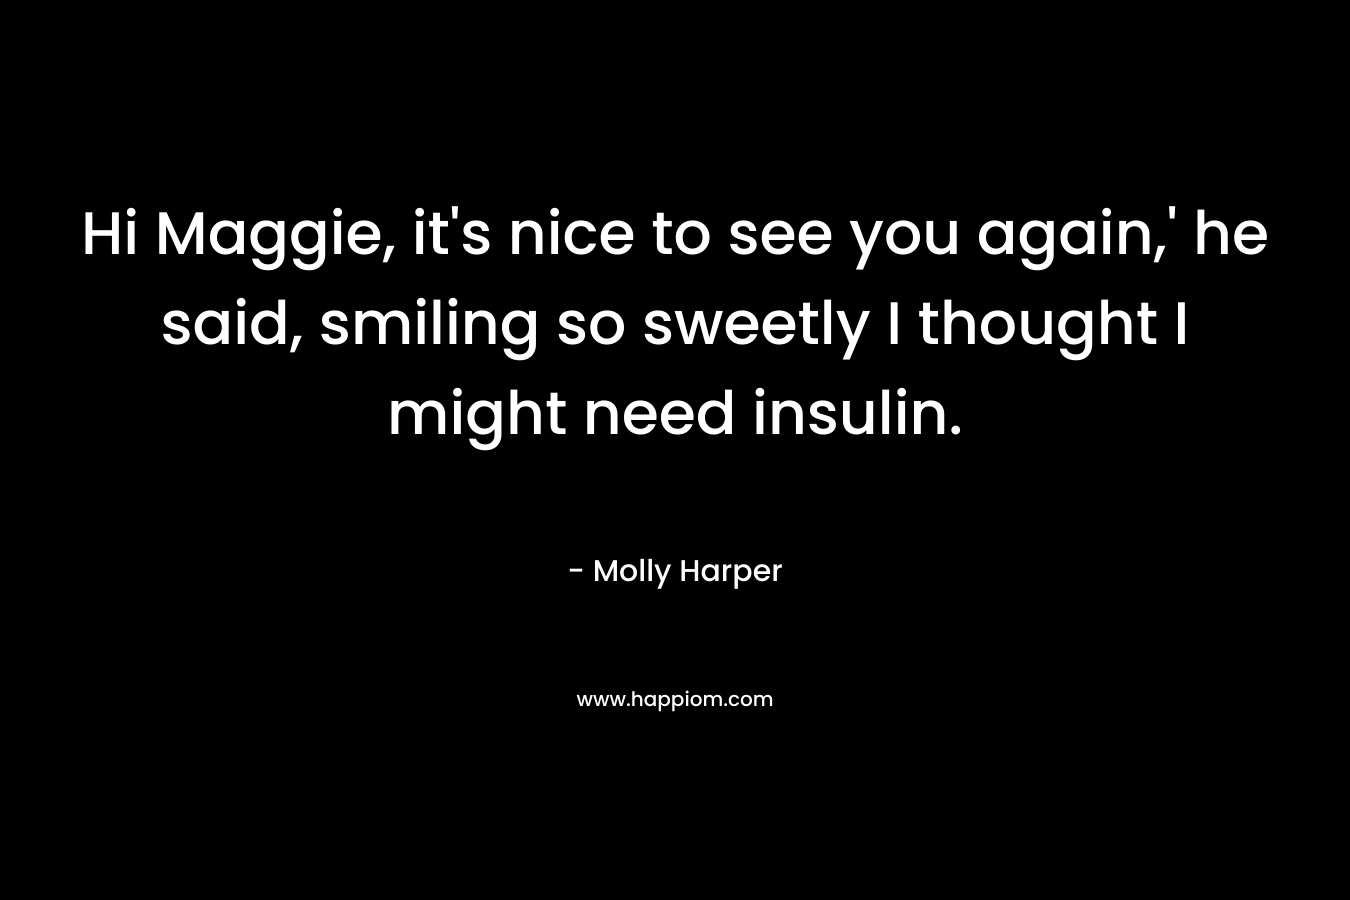 Hi Maggie, it’s nice to see you again,’ he said, smiling so sweetly I thought I might need insulin. – Molly Harper